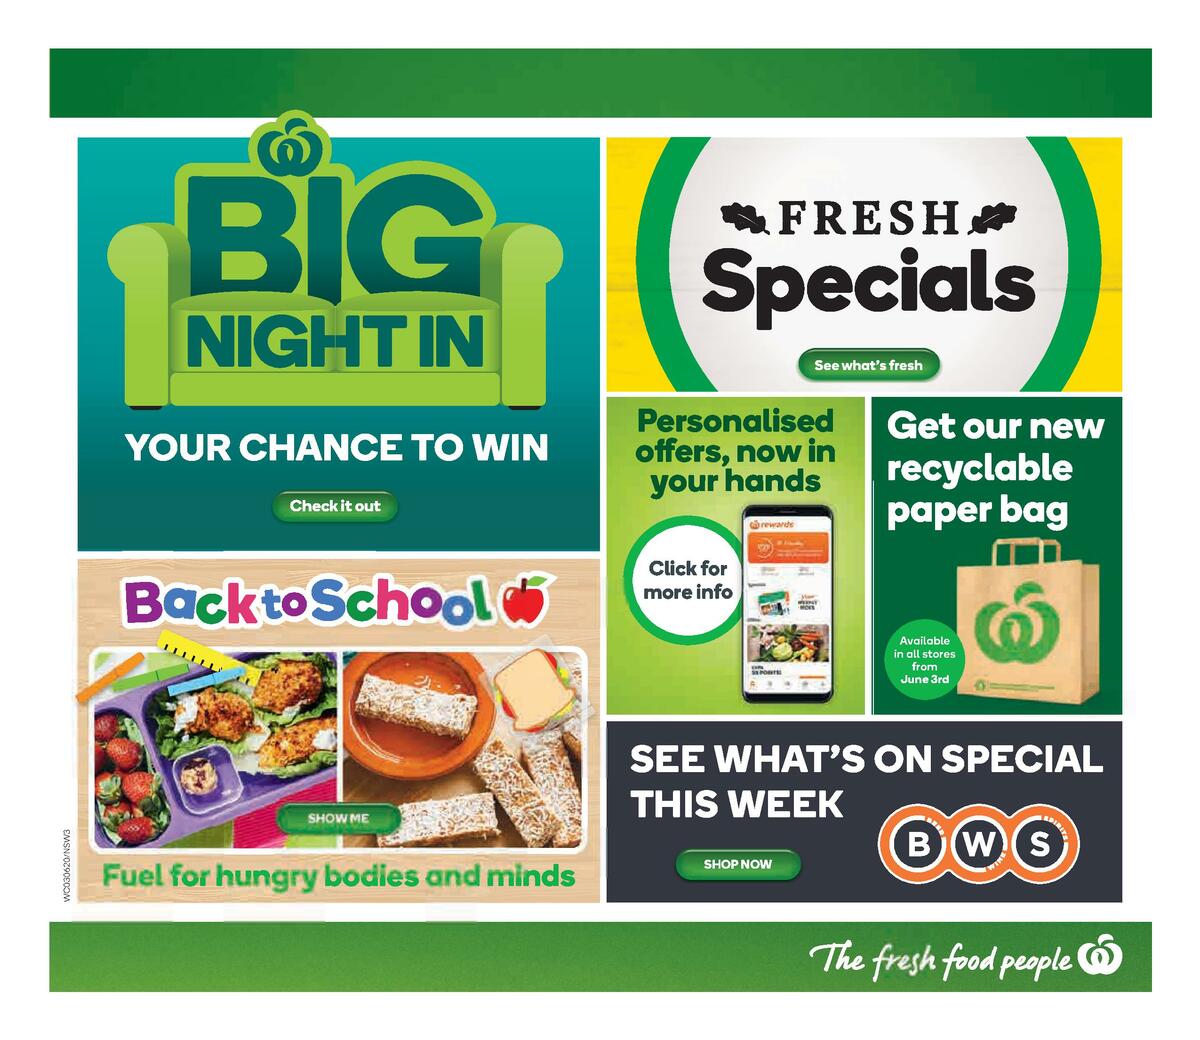 Woolworths Catalogues from 3 June